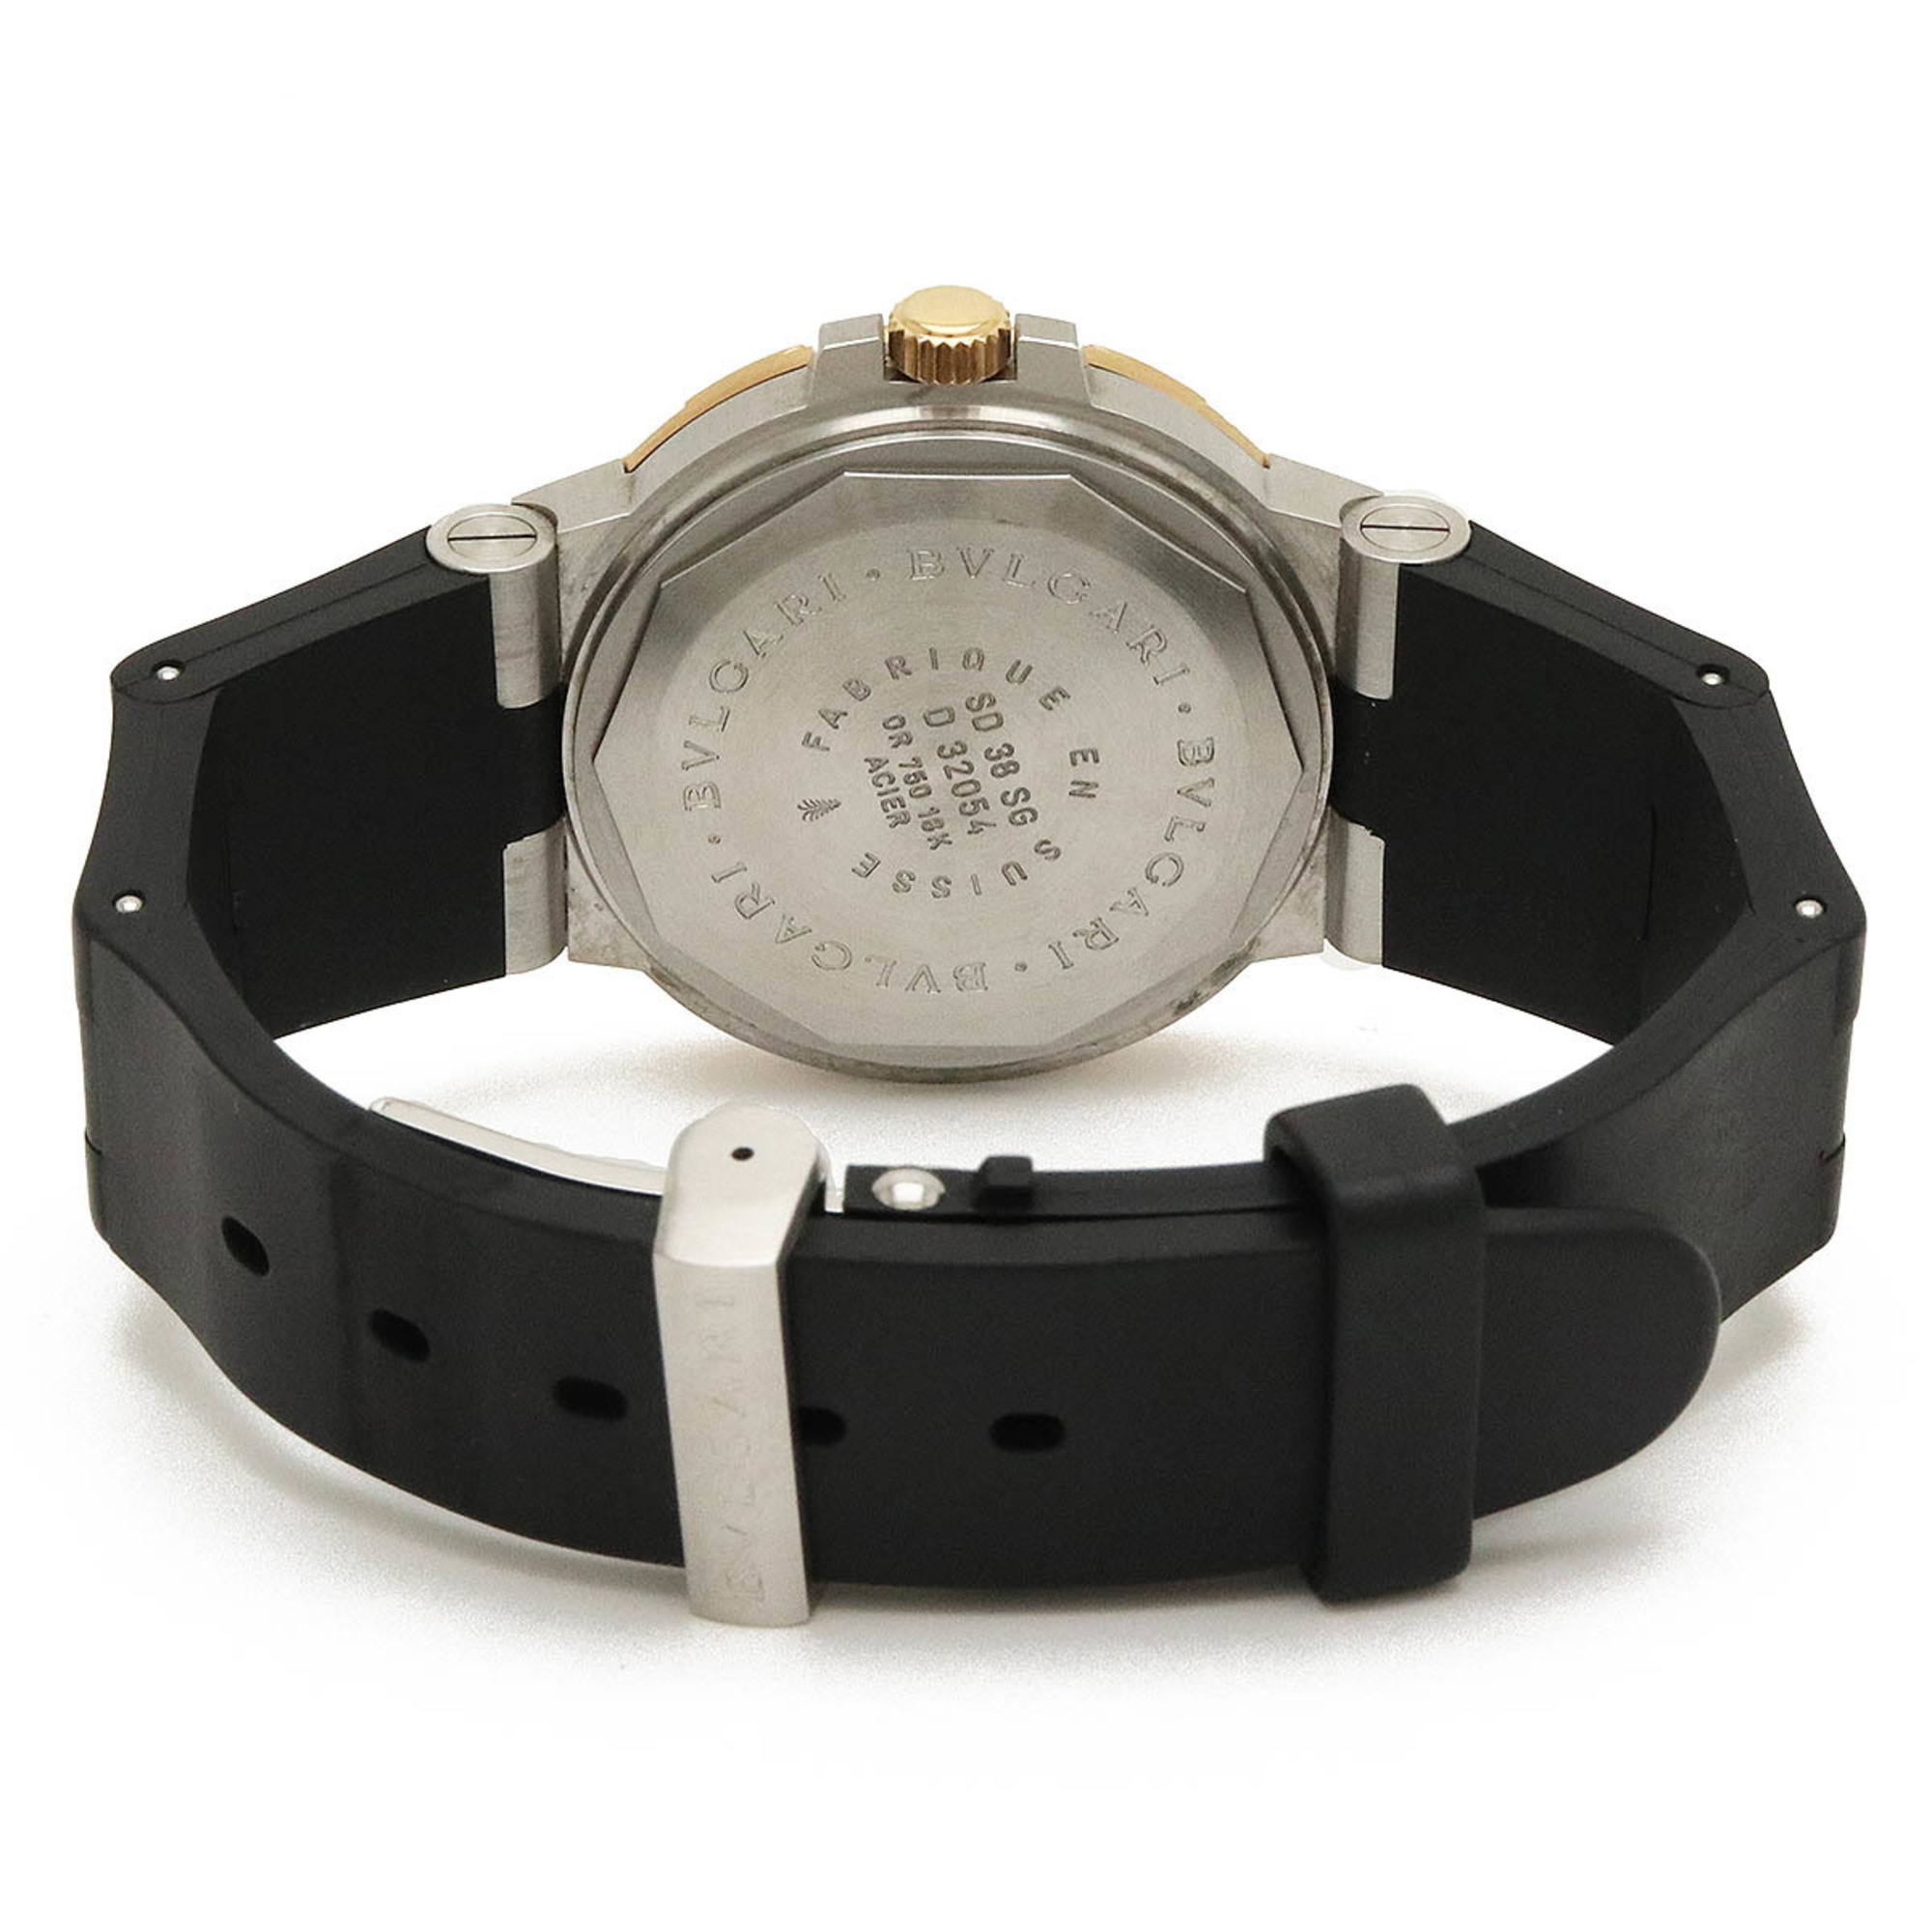 BVLGARI Diagono Scooter Date Black Dial YG SS Rubber Men's AT Automatic Watch SD38SG